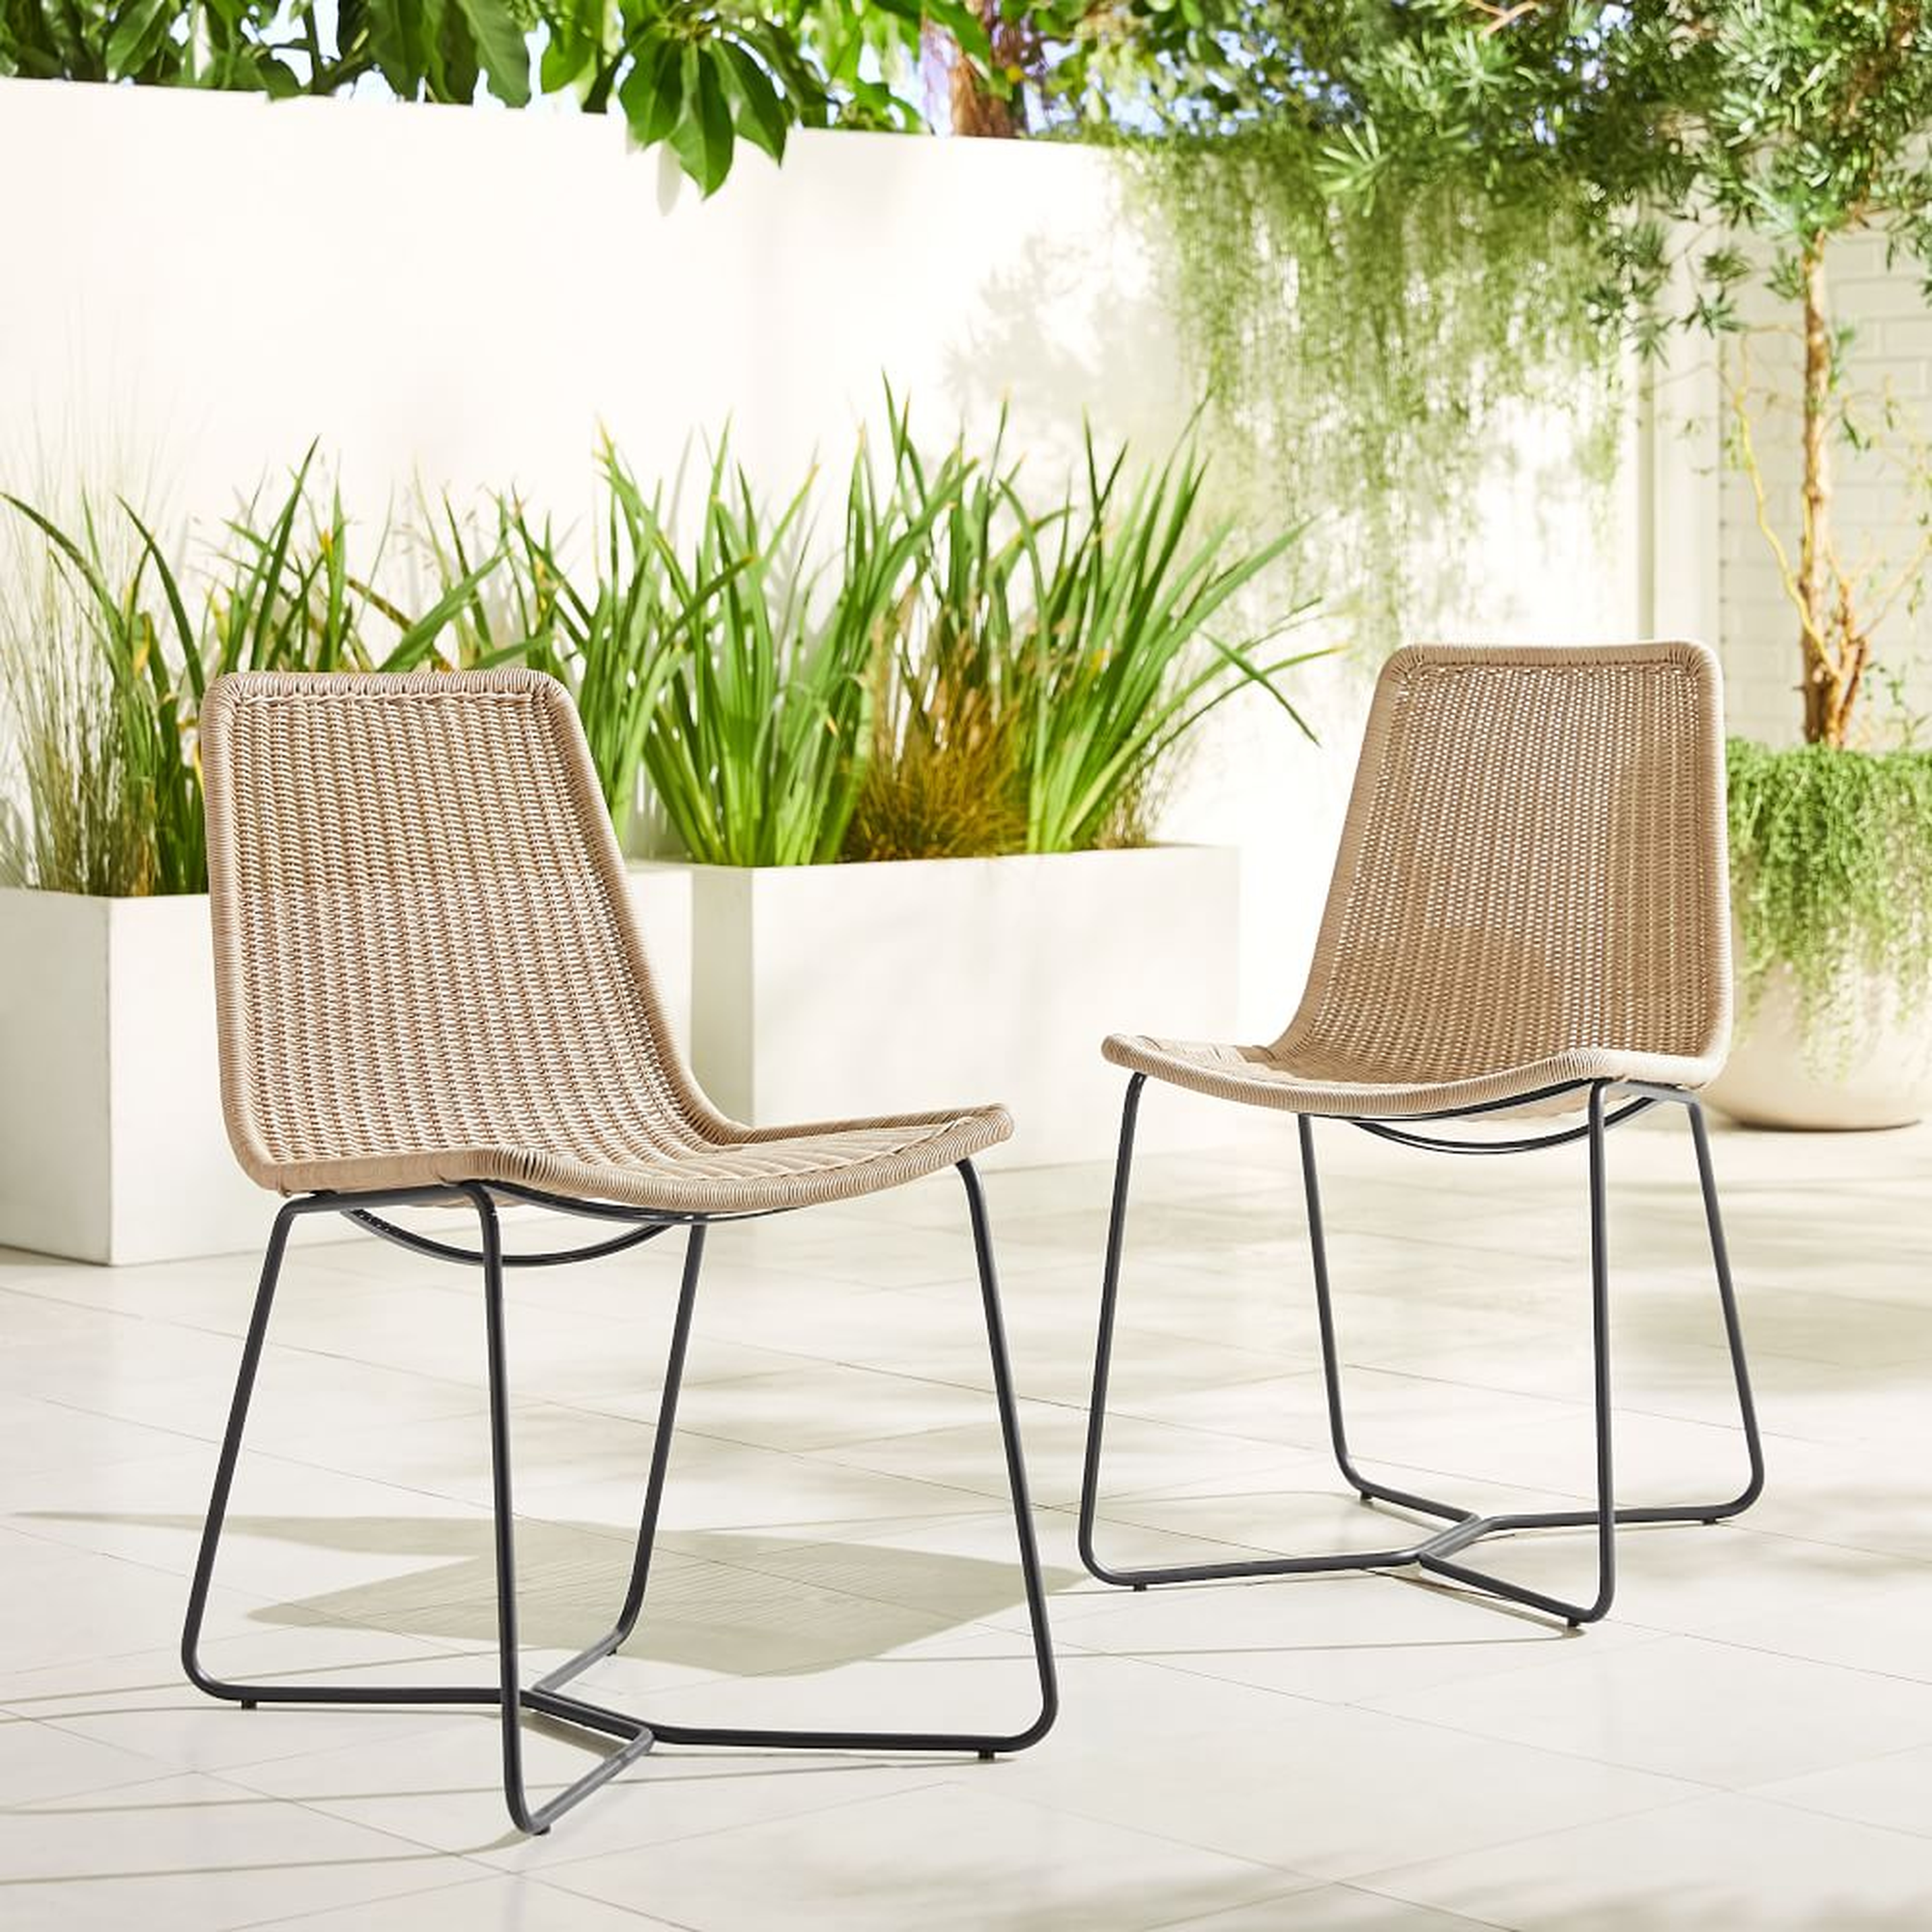 Slope Outdoor Dining Chair, Natural, Set of 4 - West Elm